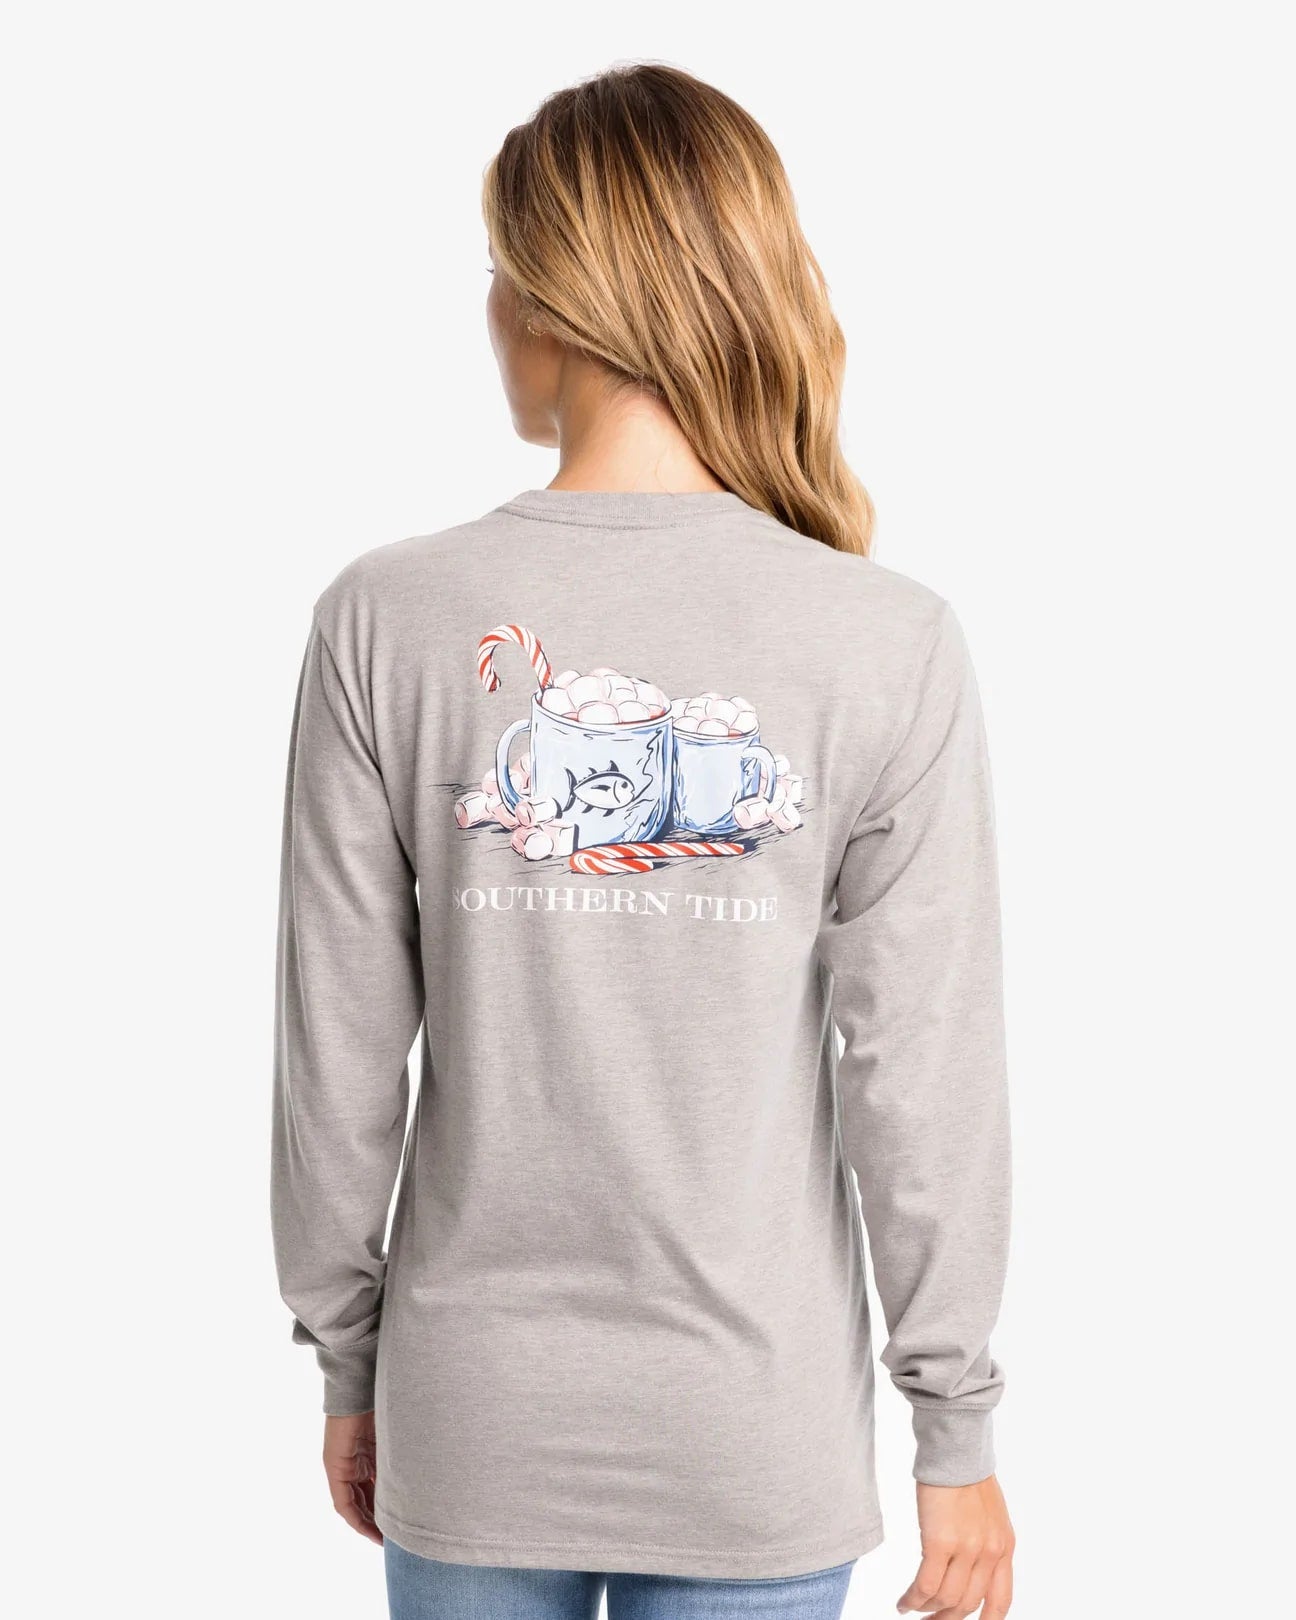 Women's hot coco long sleeve tee from Southern Tide.